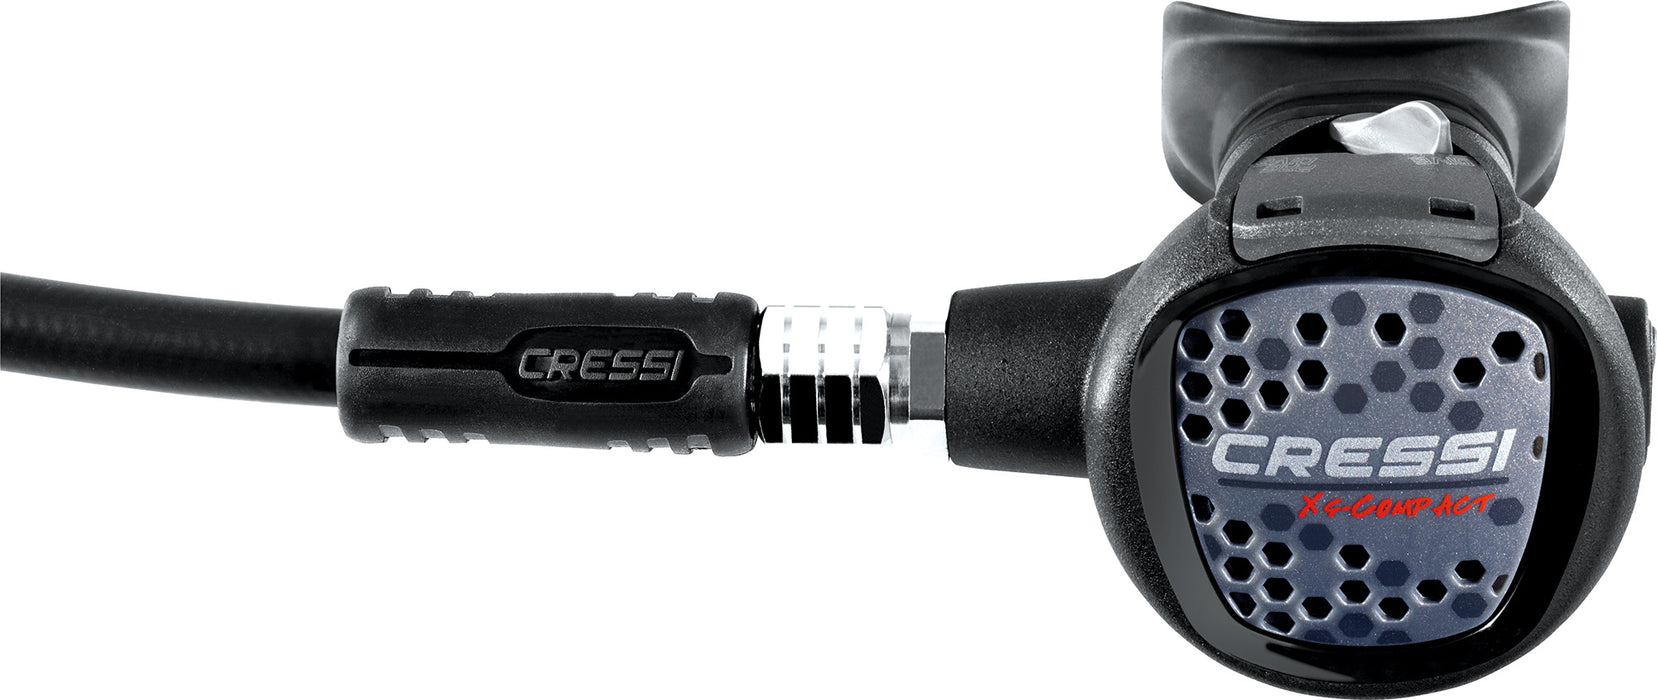 Cressi Intense Use Scuba Diving Regulator | Piston 1st Stage, Compact 2nd Stage | AC2/Compact: Made in Italy